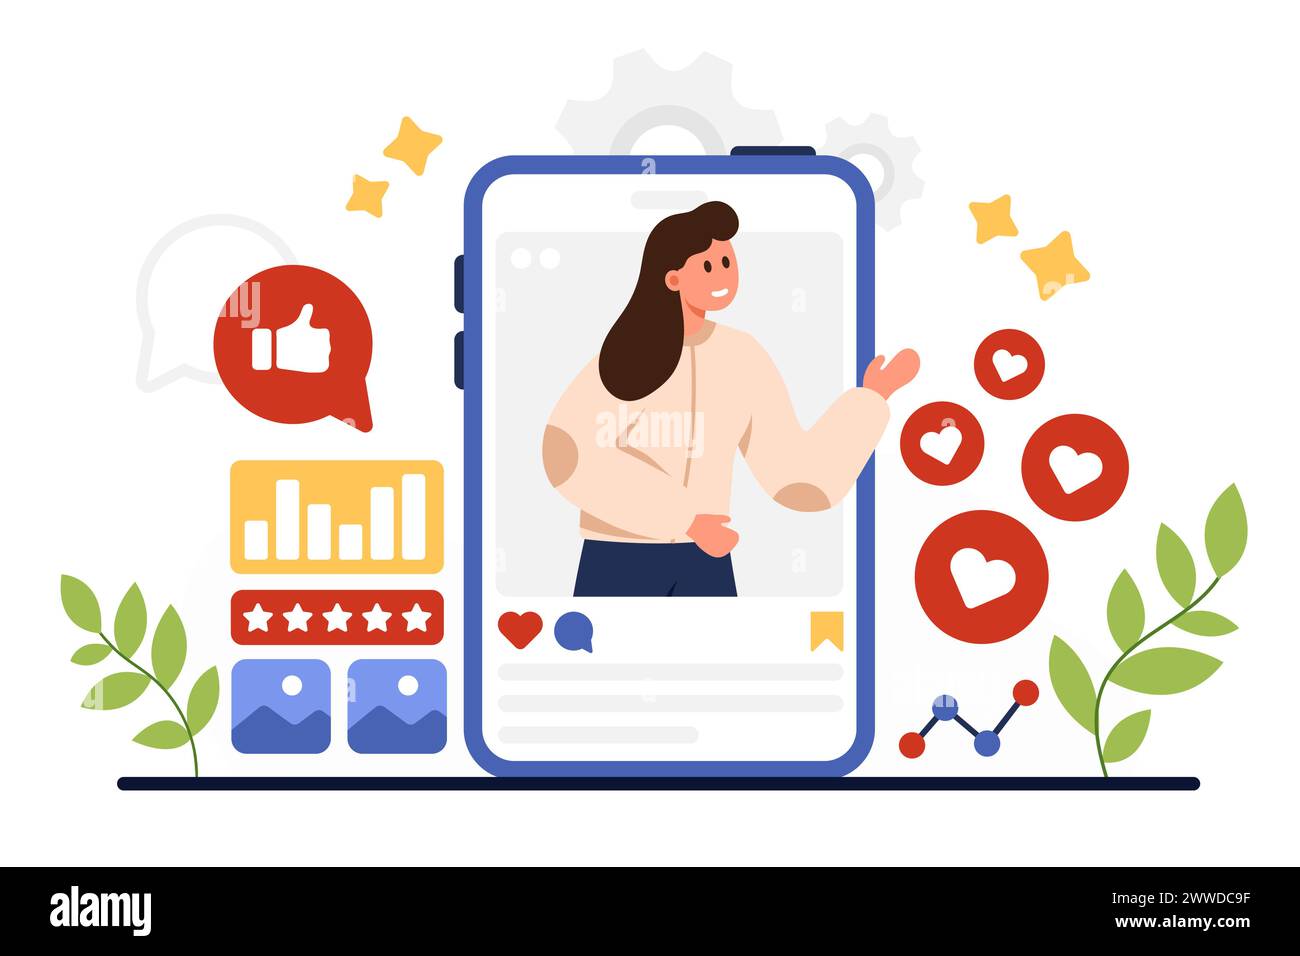 Personal branding, reputation in social media. Tiny woman from mobile phone screen pointing on red heart likes, building online brand identity with digital content cartoon vector illustration Stock Vector